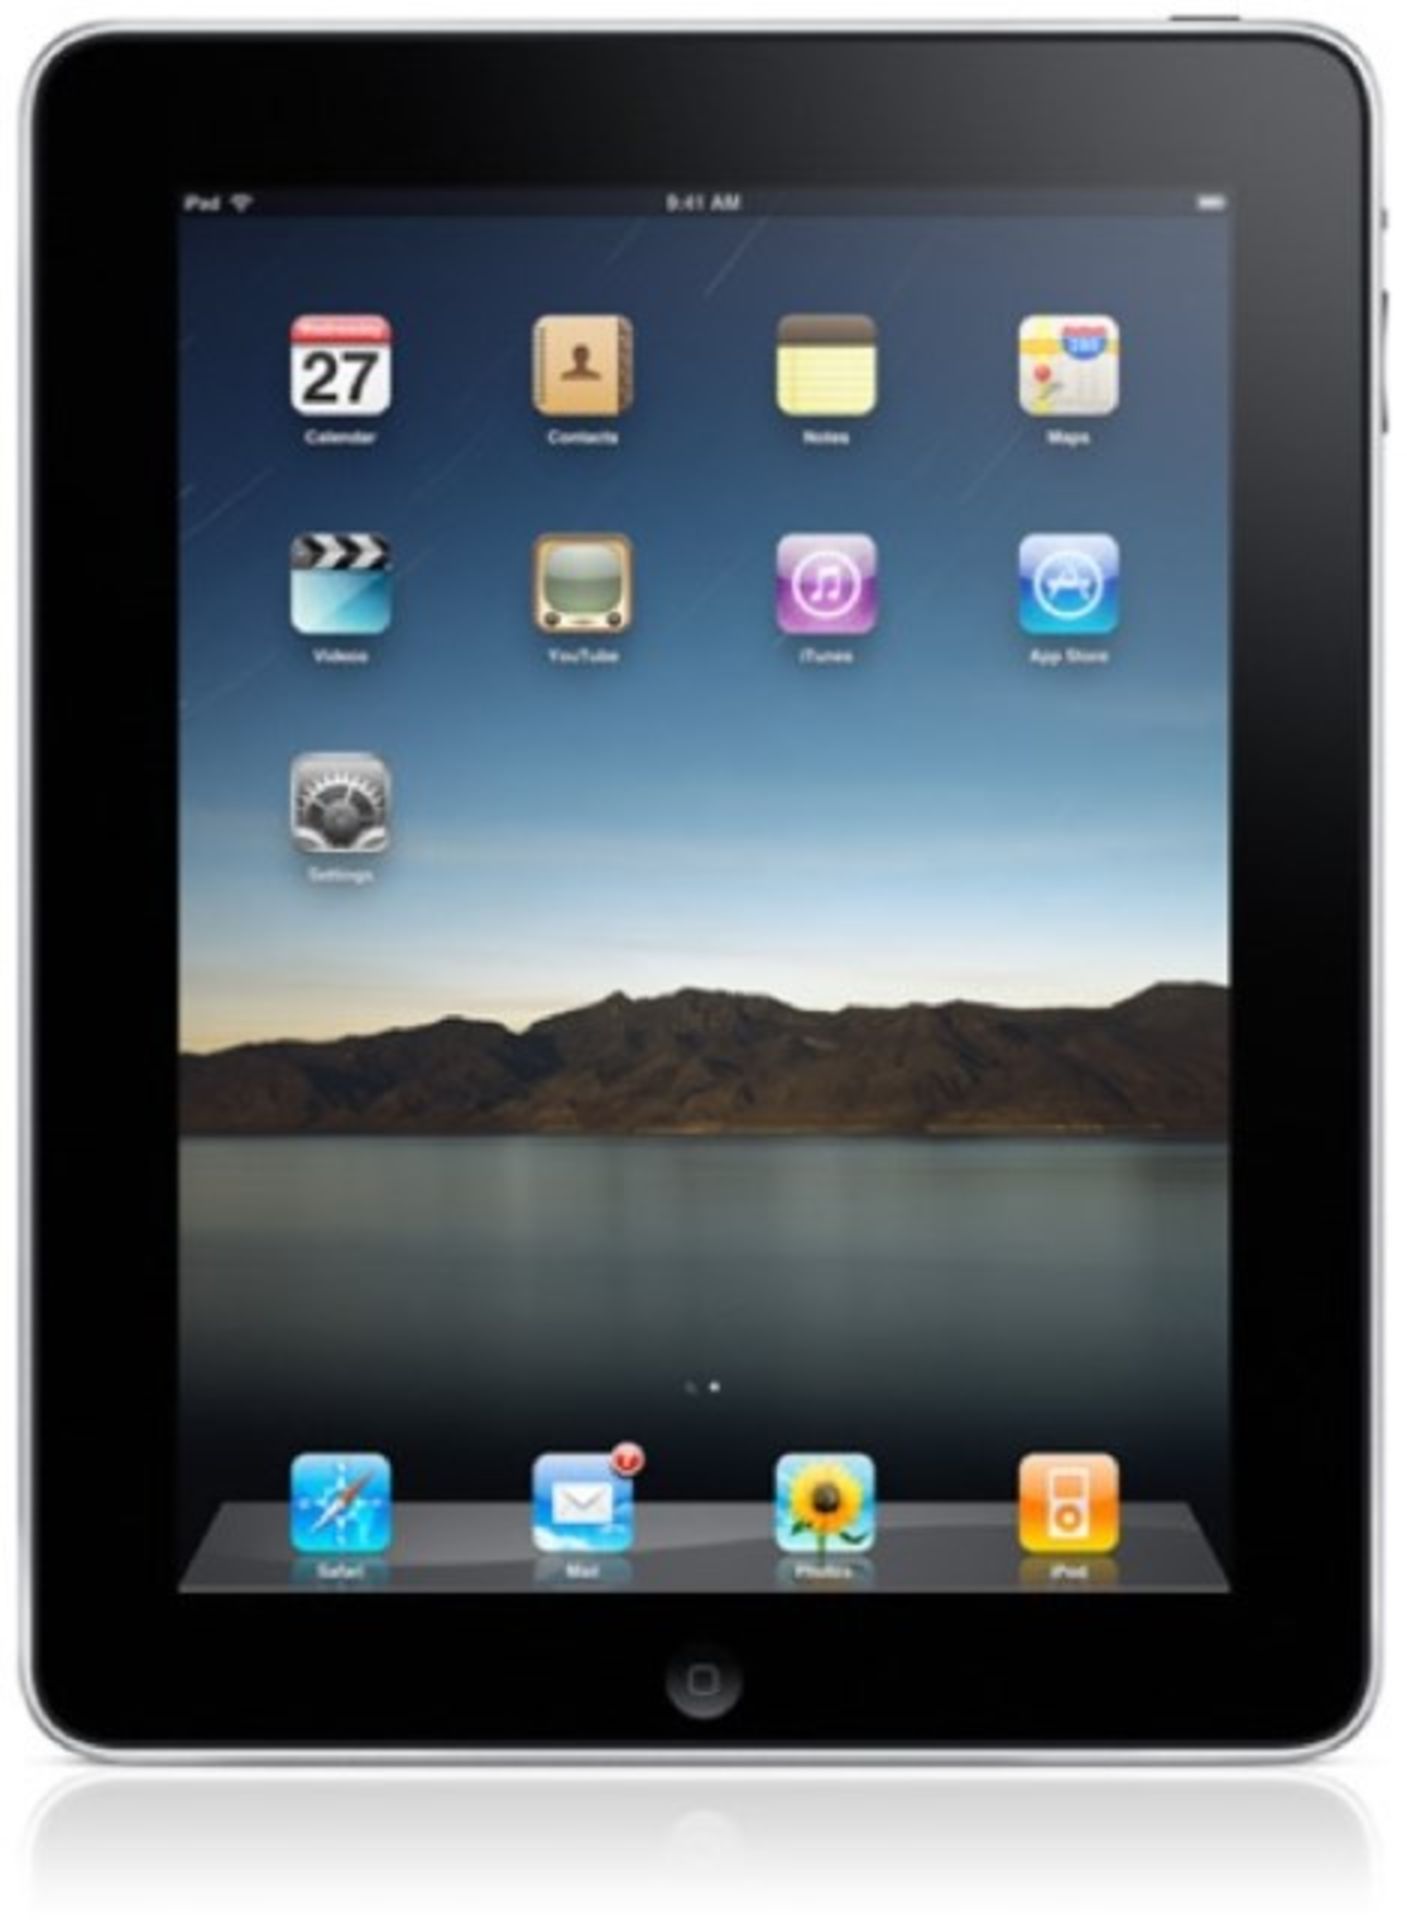 V Apple iPad 16Gb Wi-Fi with box and warranty (some units may be scratched or dented)